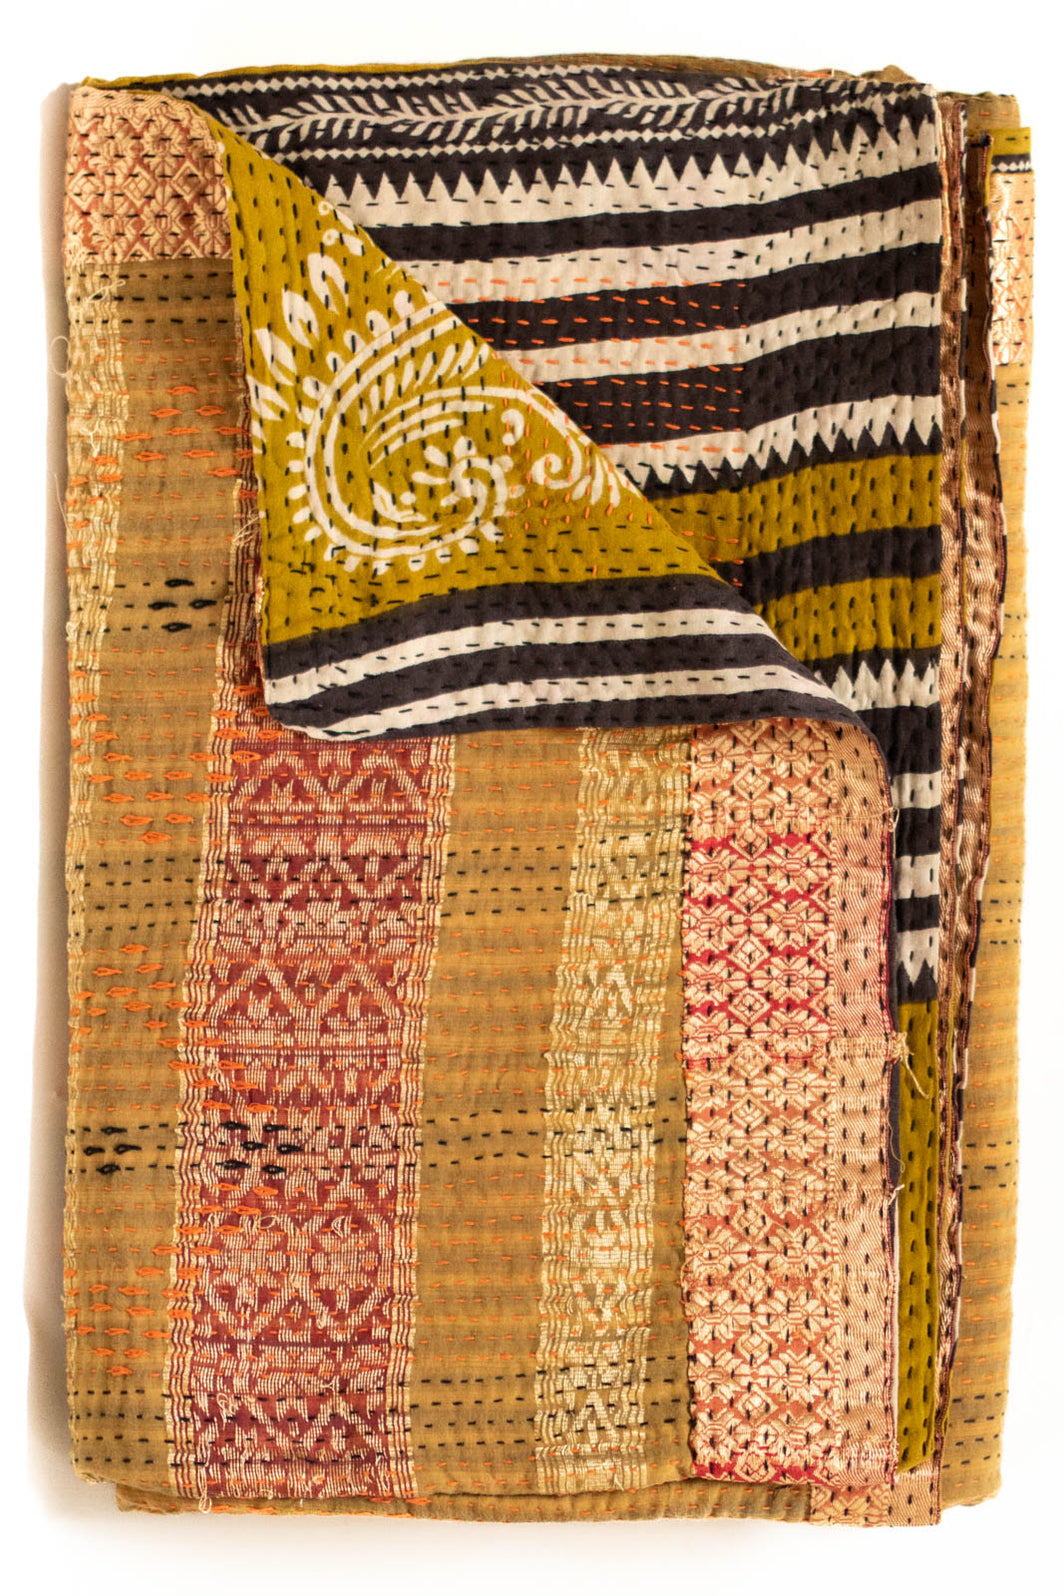 Kantha Throw Quilts & Blankets | Vintage, Handmade & Indian Style